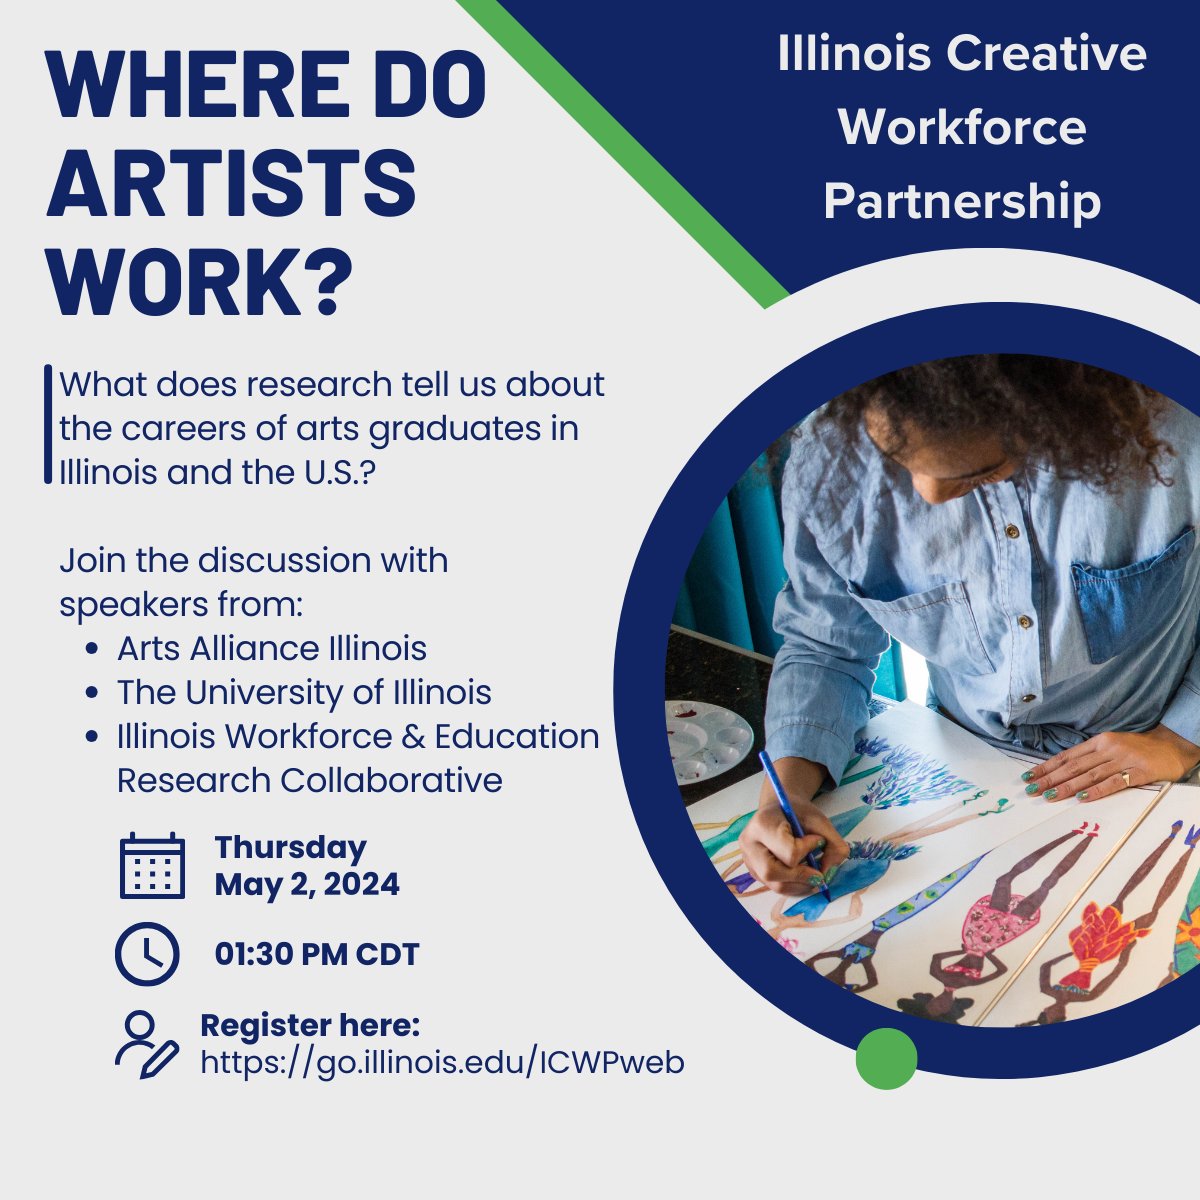 Arts graduates are working outside their major fields. This prompts discussions on their preparation for diverse sectors. Register to join the conversation! go.illinois.edu/ICWPweb

#CreativeSkills #ArtsEducation #DiverseCareers